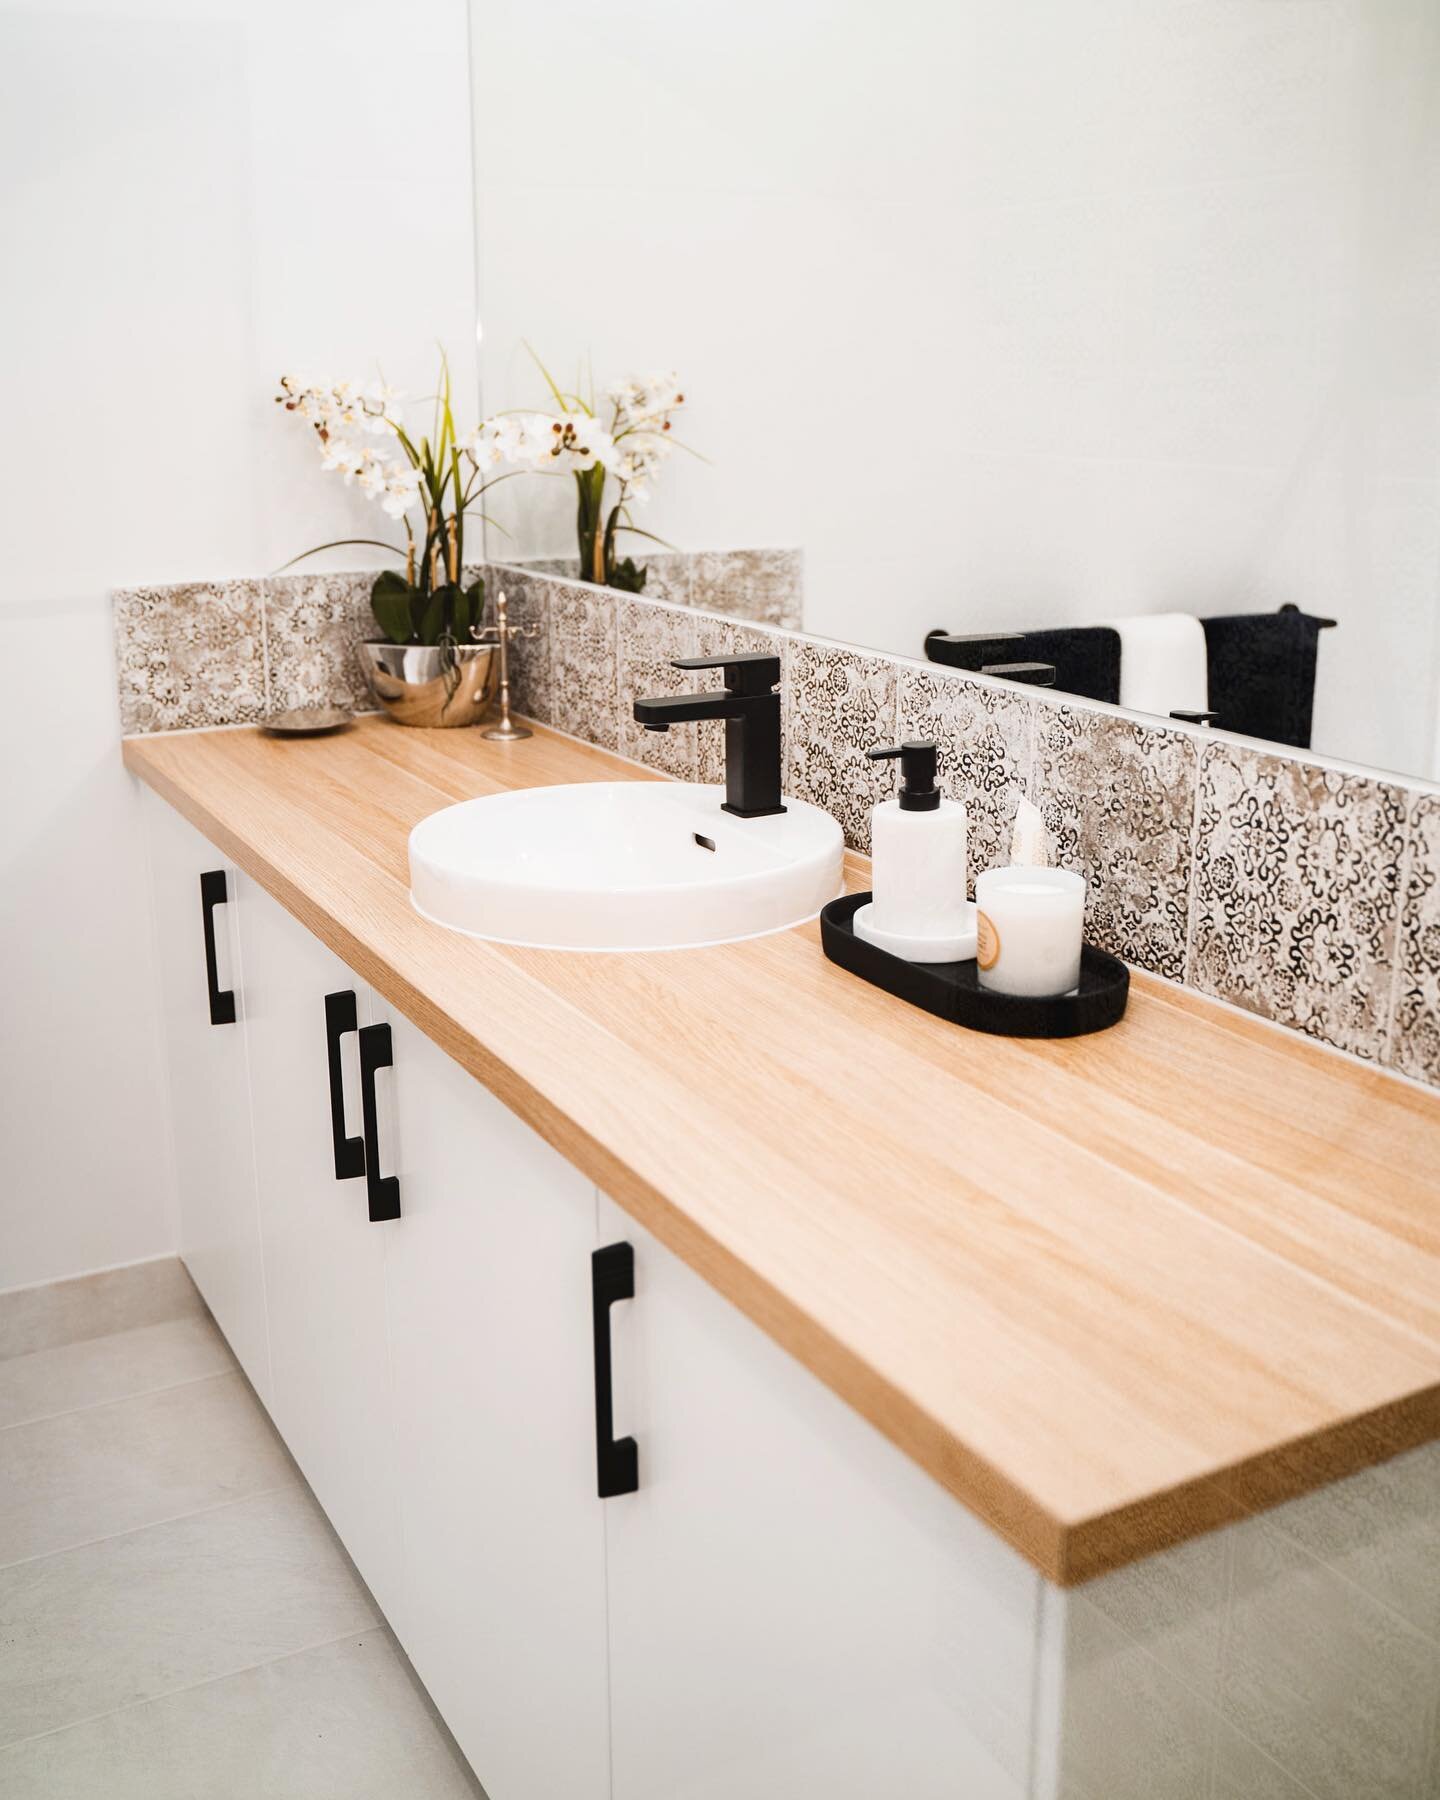 Improving your bathroom vanity can completely change the look/feel of your bathroom. 
-
Does your vanity need an update? Book a free Planning Session, link in bio.